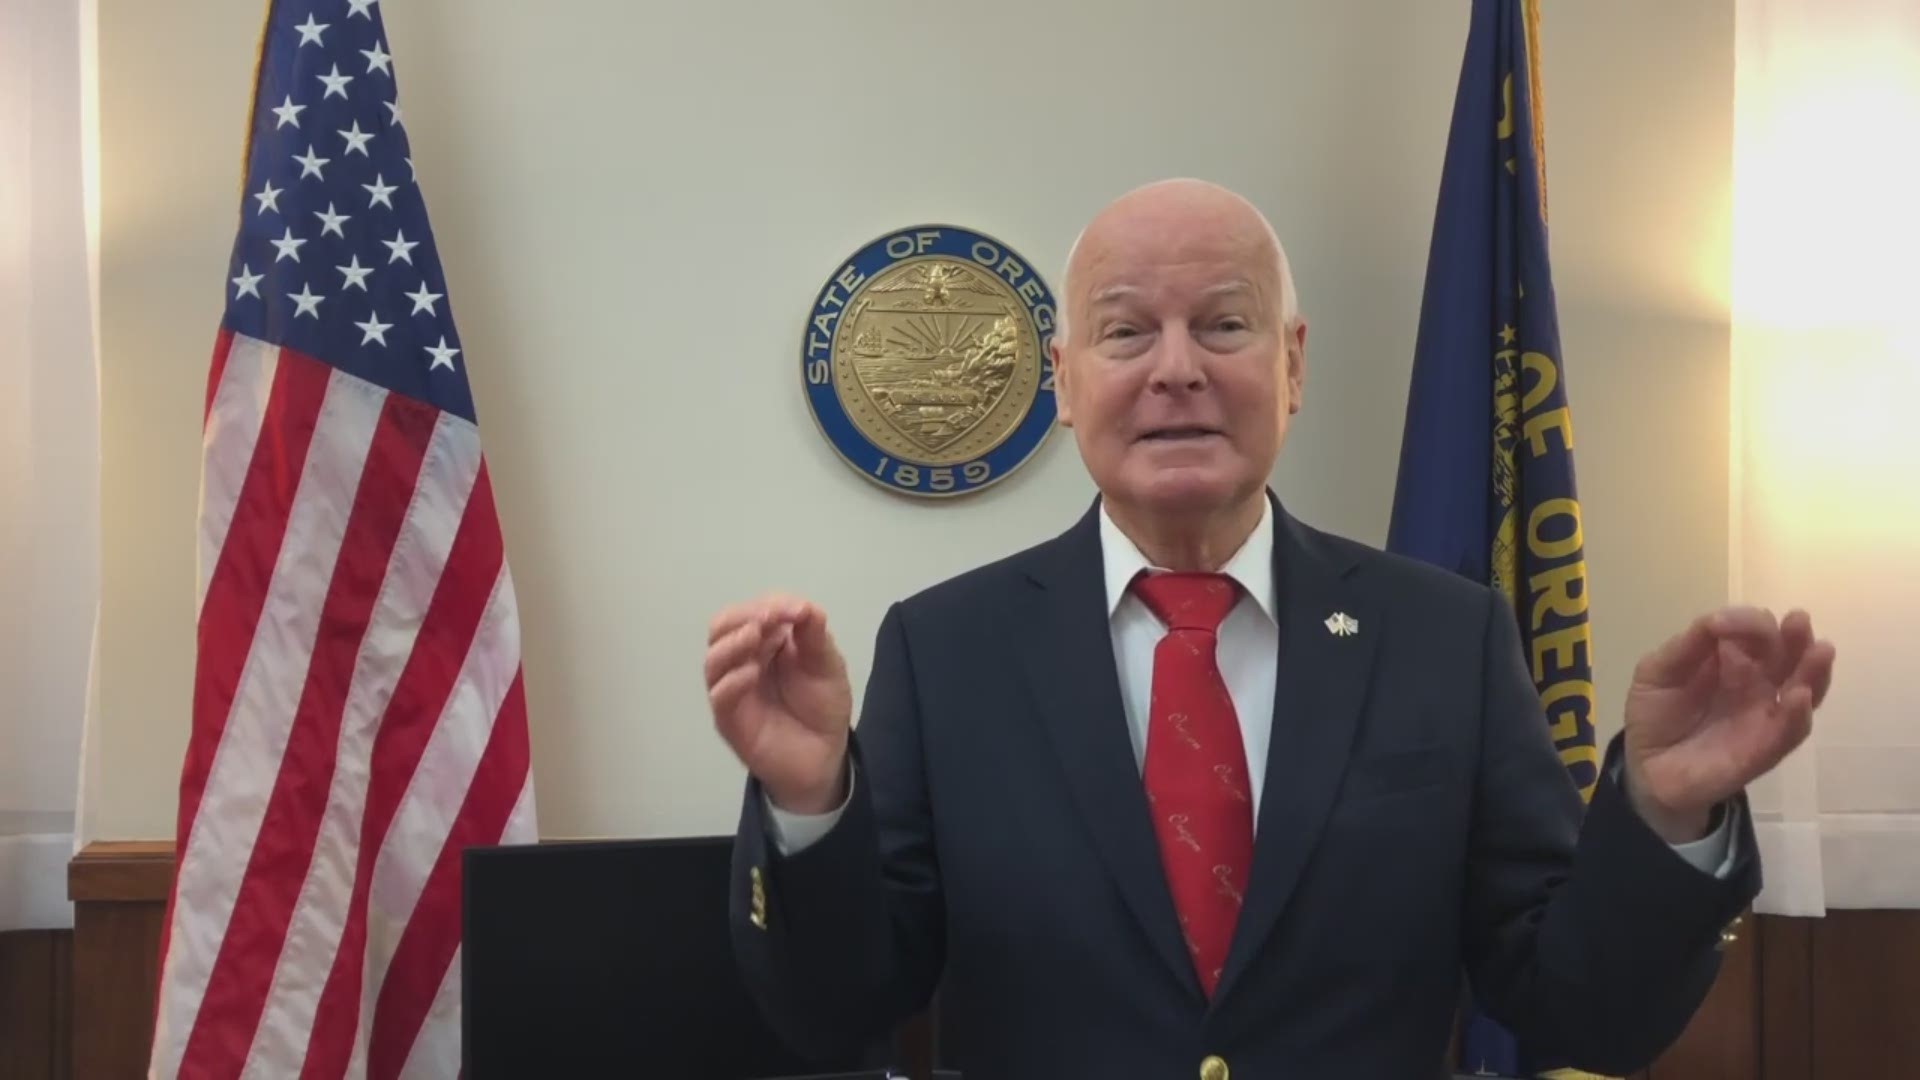 After being diagnosed with a cancerous brain tumor, the Oregon Secretary of State sent out a video update about his health and the outpouring of support he has received.